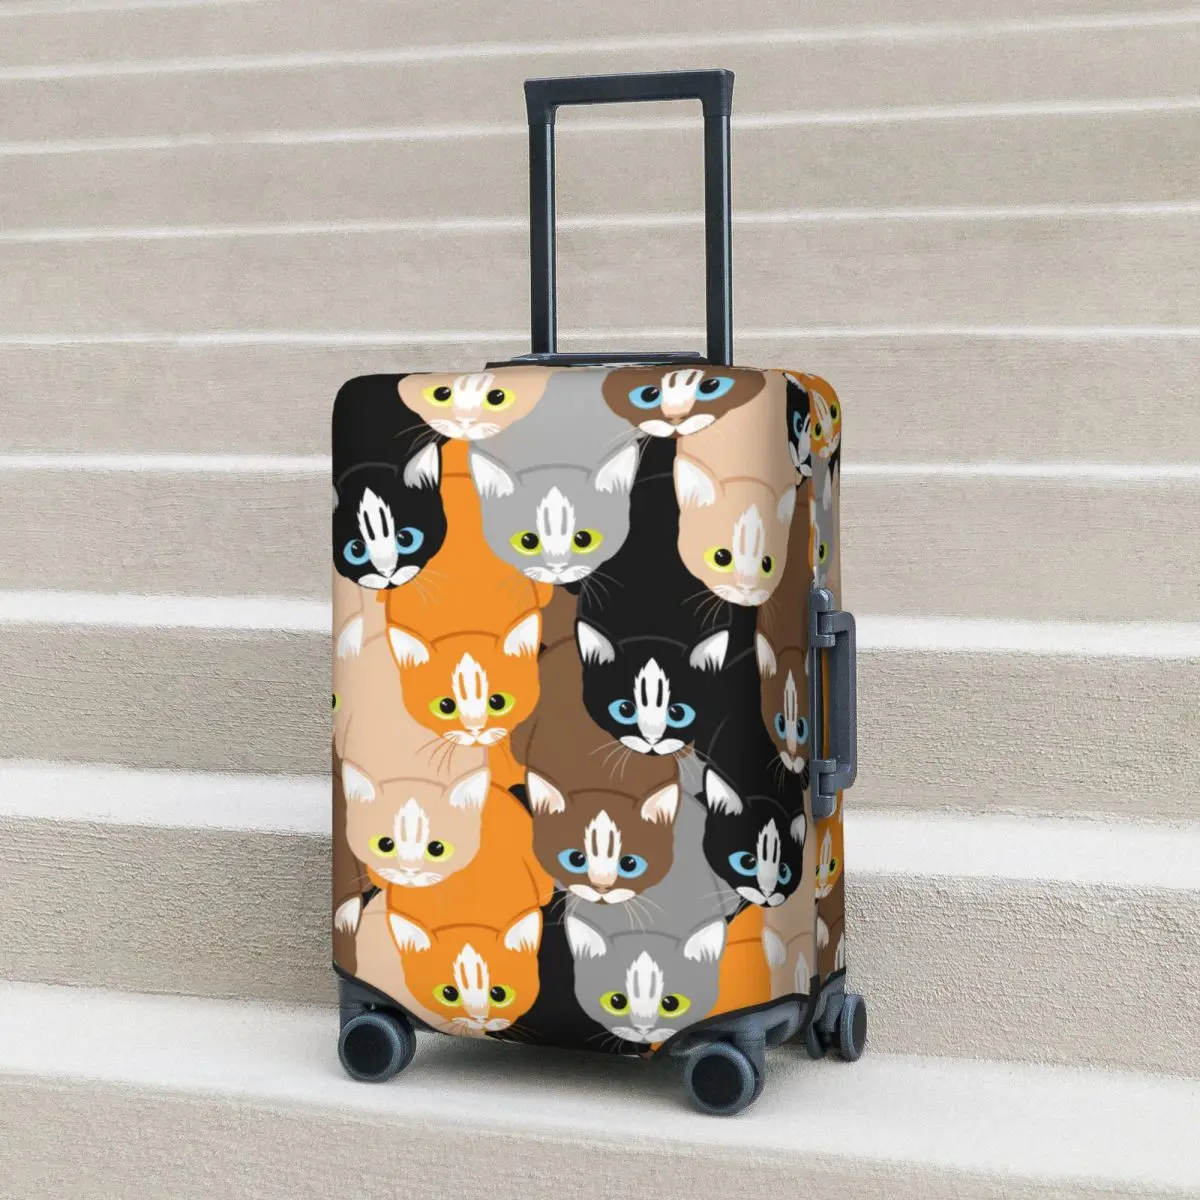 

Cute Cats Animal Suitcase Cover Comics Flight Business Strectch Luggage Case Protection Christmas Gift